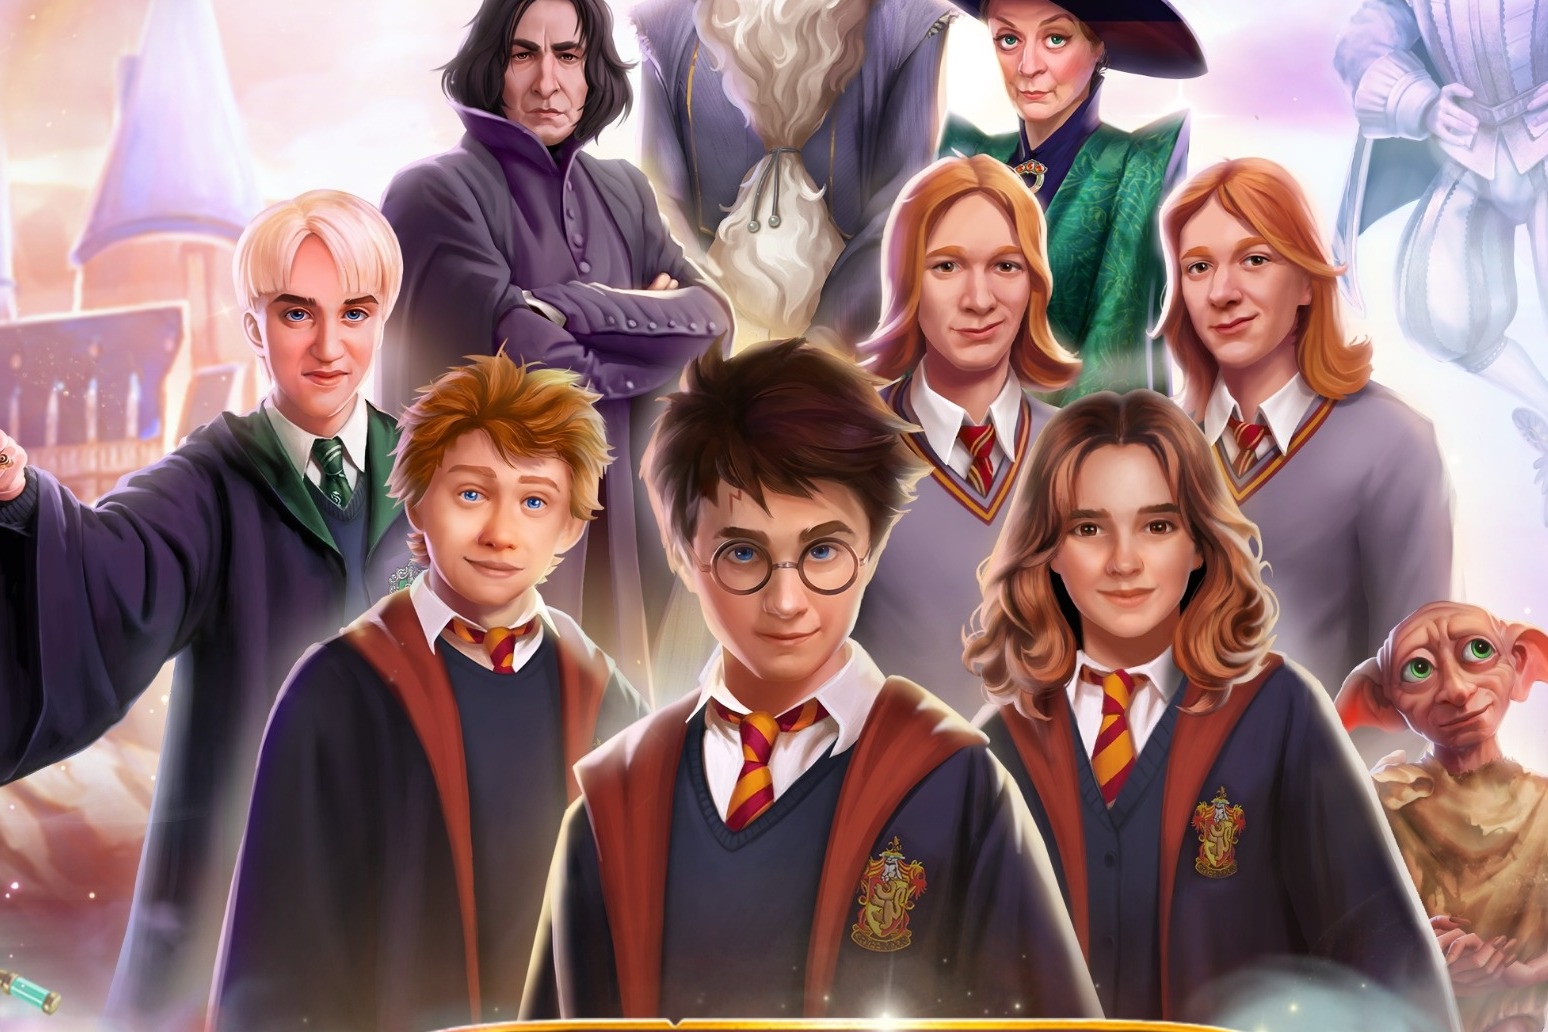 Trigger warnings on Harry Potter doing a ‘disservice’ to students, says minister 